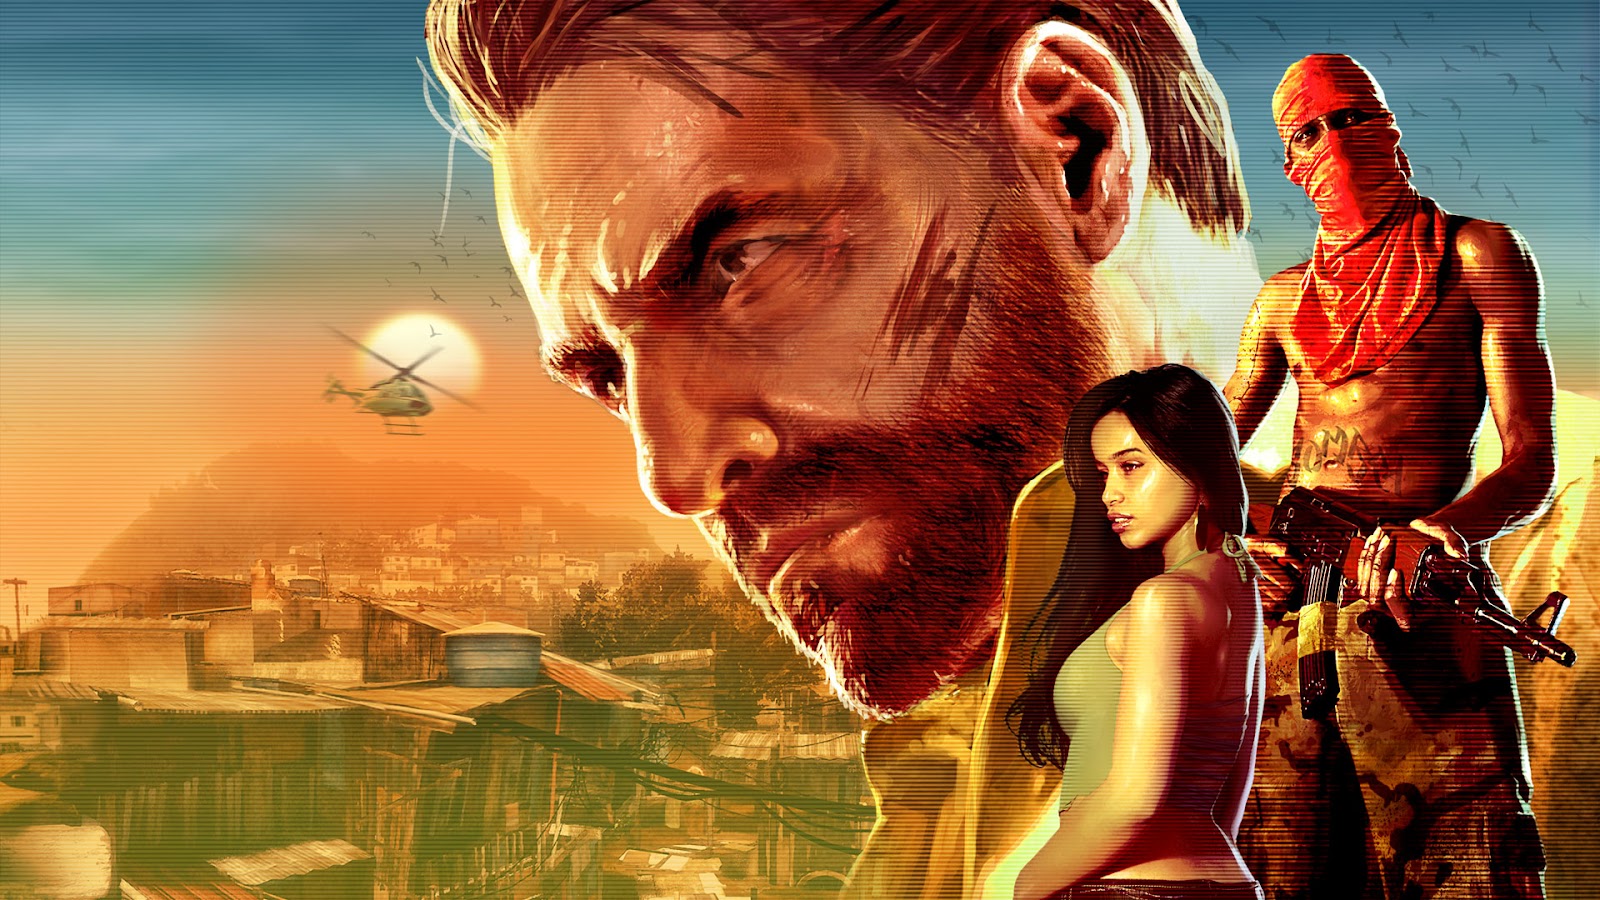 Max Payne 3: I Aggressively Hate This Game - my story -